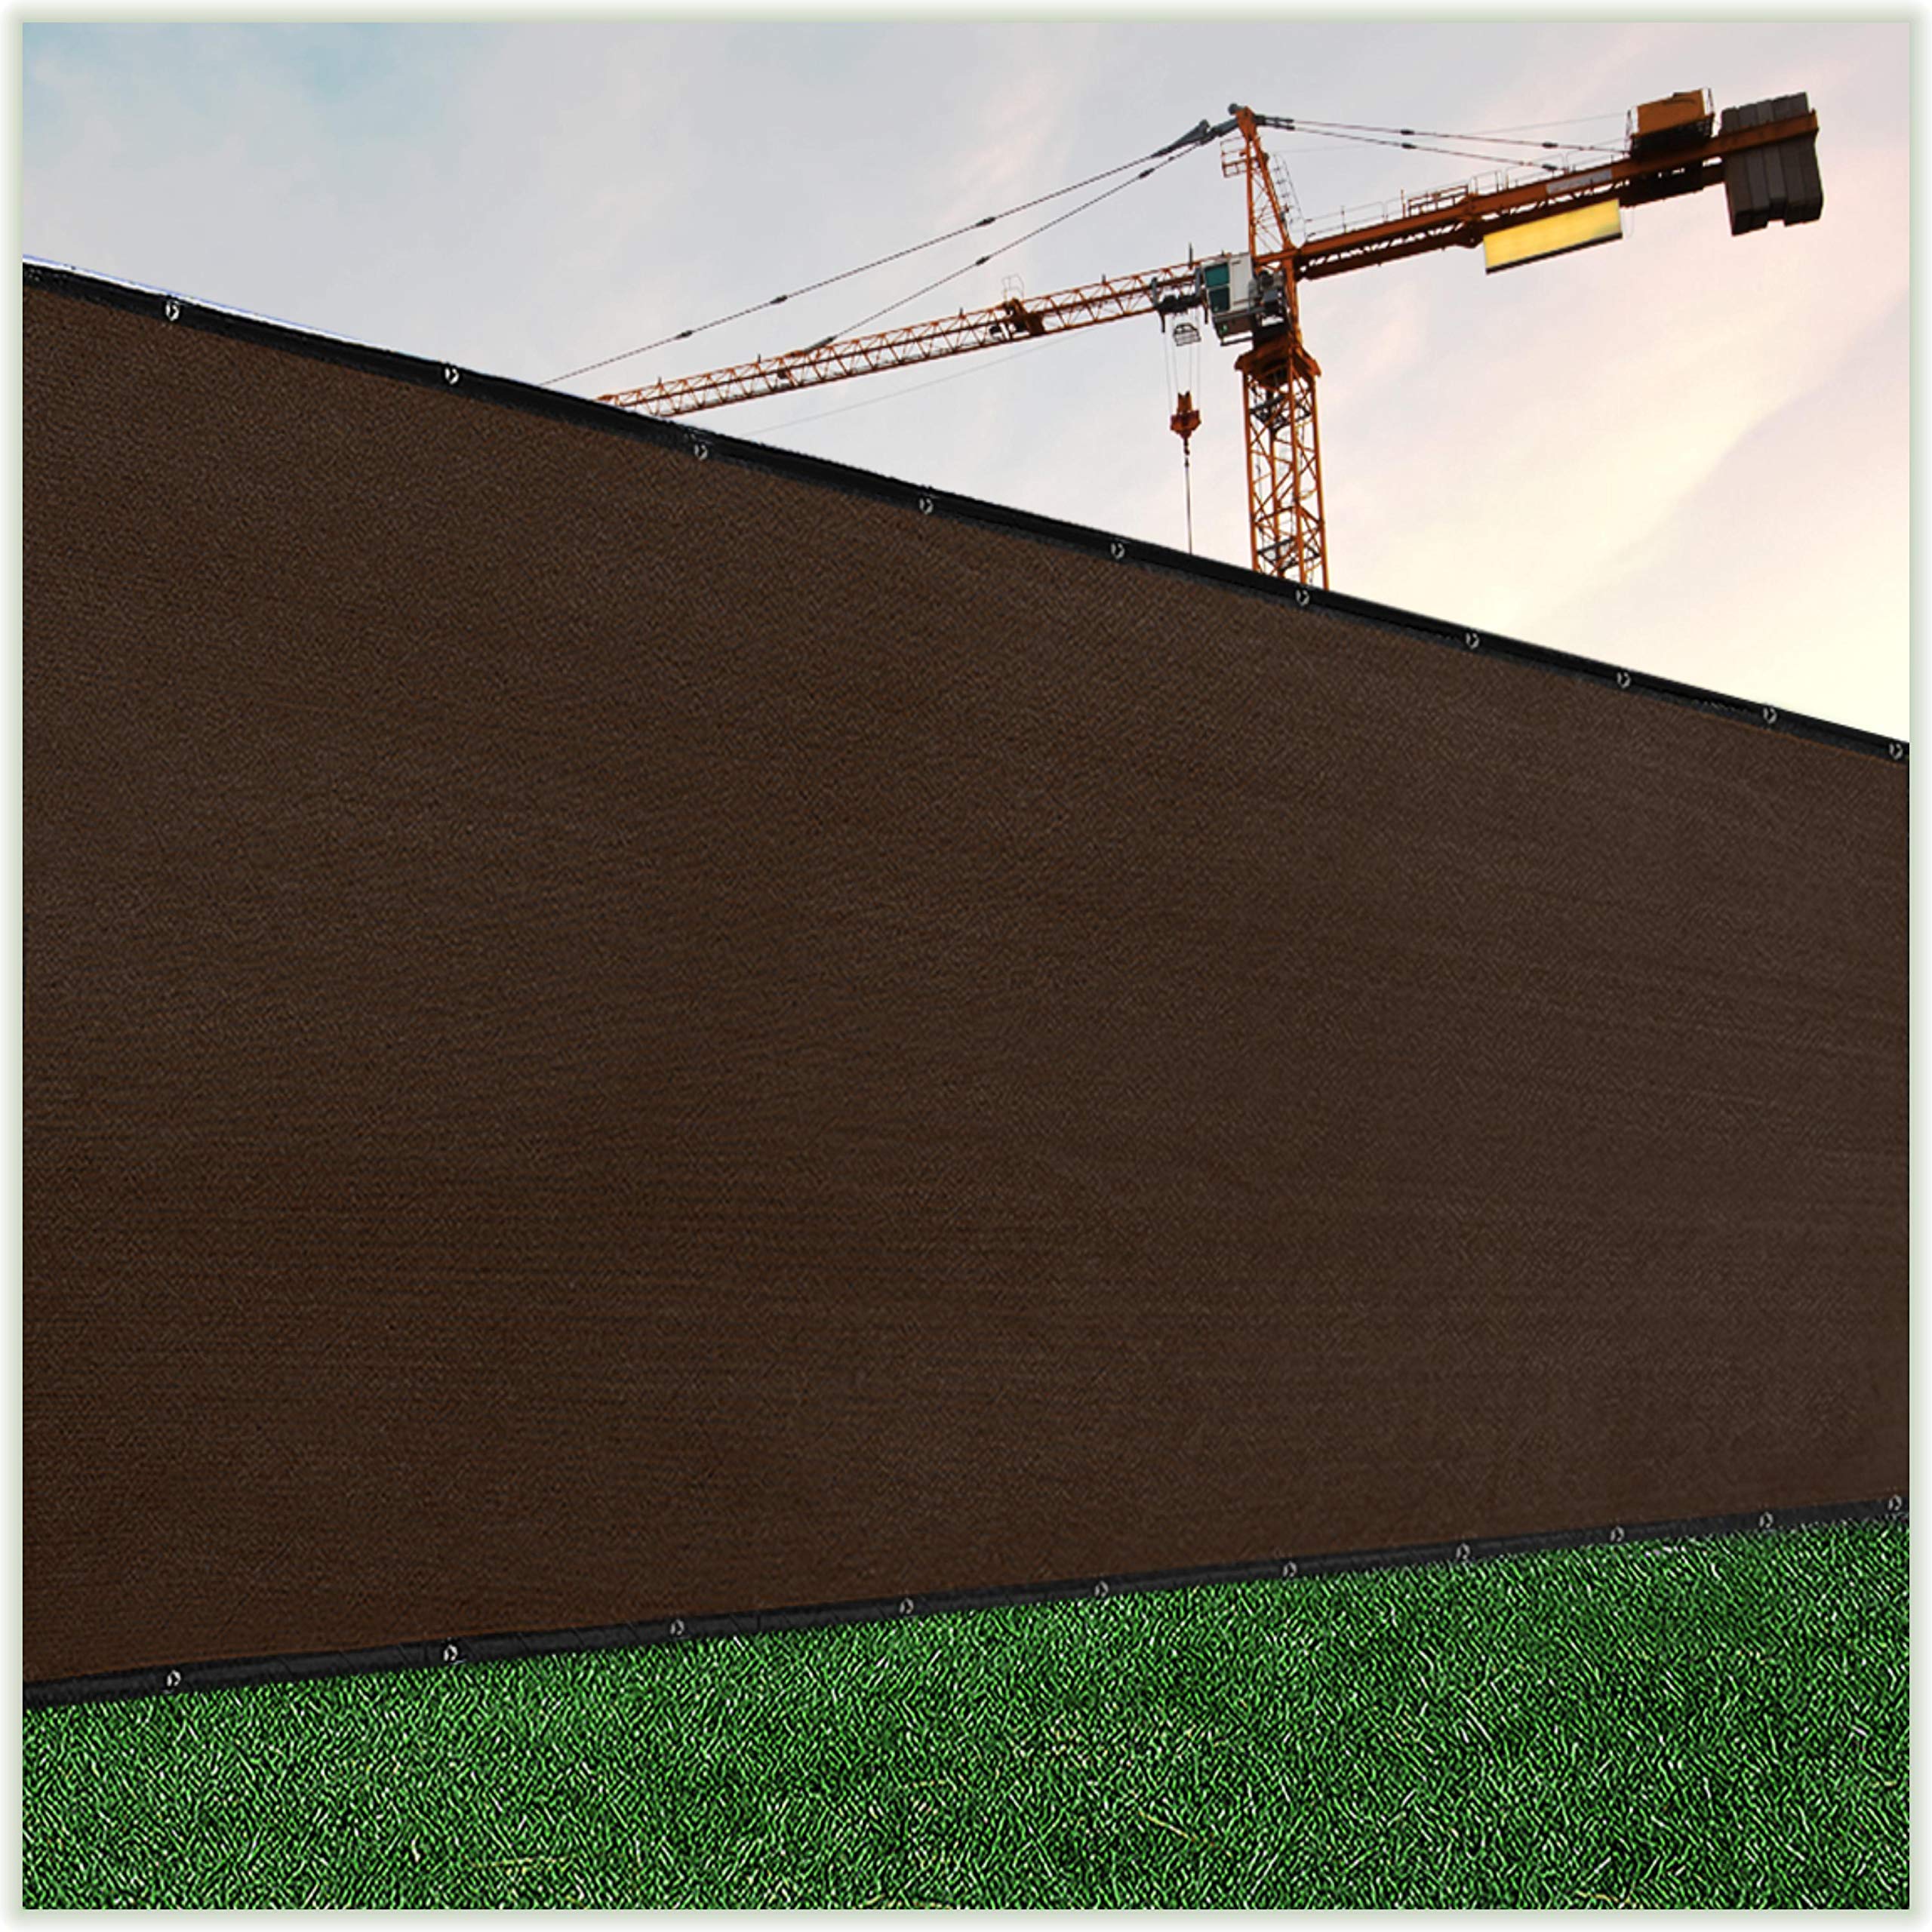 Colourtree Customized Size Fence Screen Privacy Screen Brown 8 X 130 - Commercial Grade 170 Gsm - Heavy Duty - 3 Years Warranty